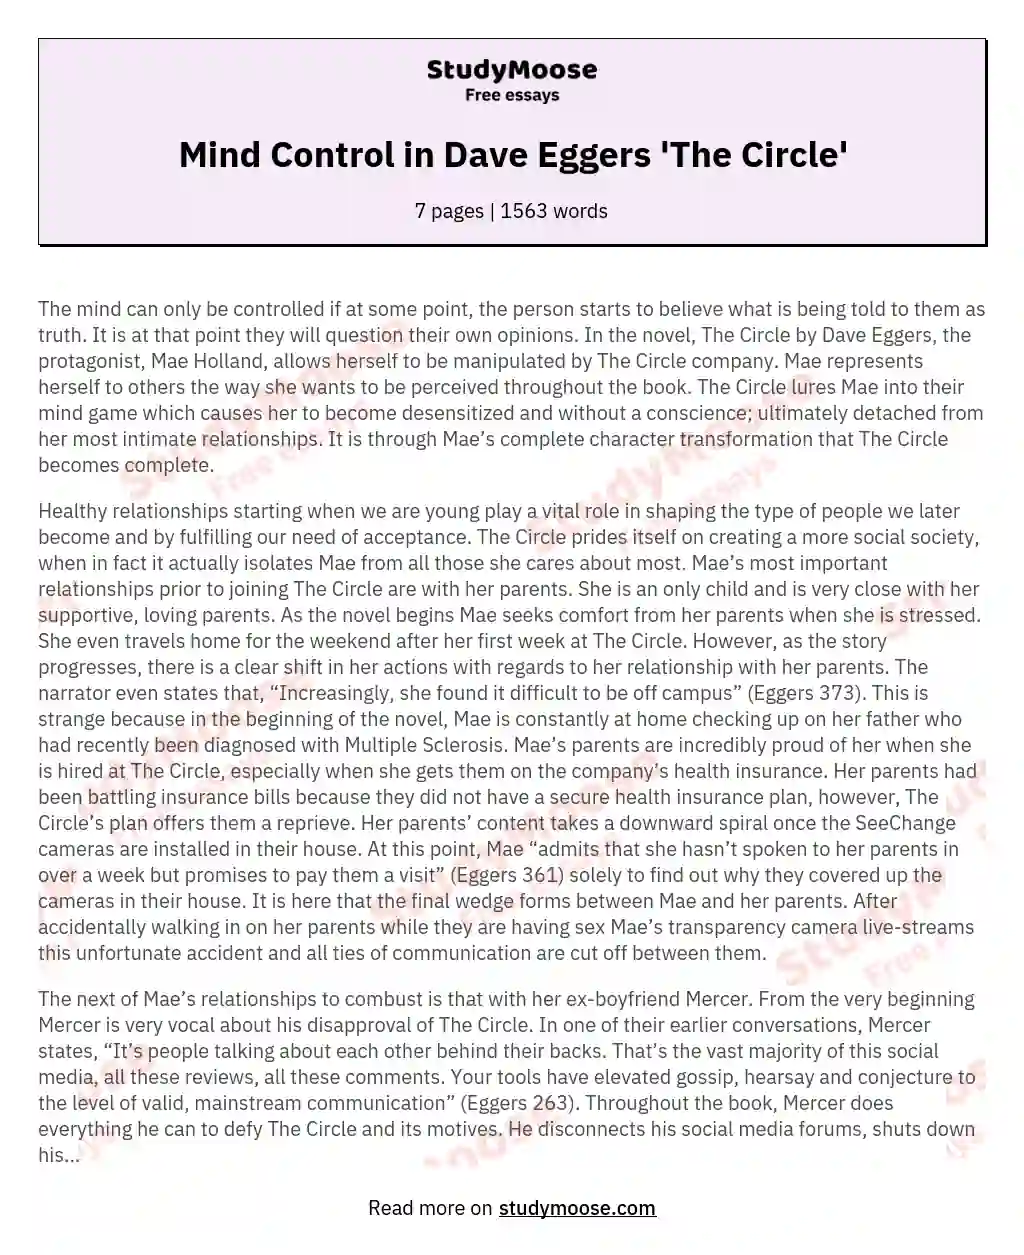 Mind Control in Dave Eggers 'The Circle'